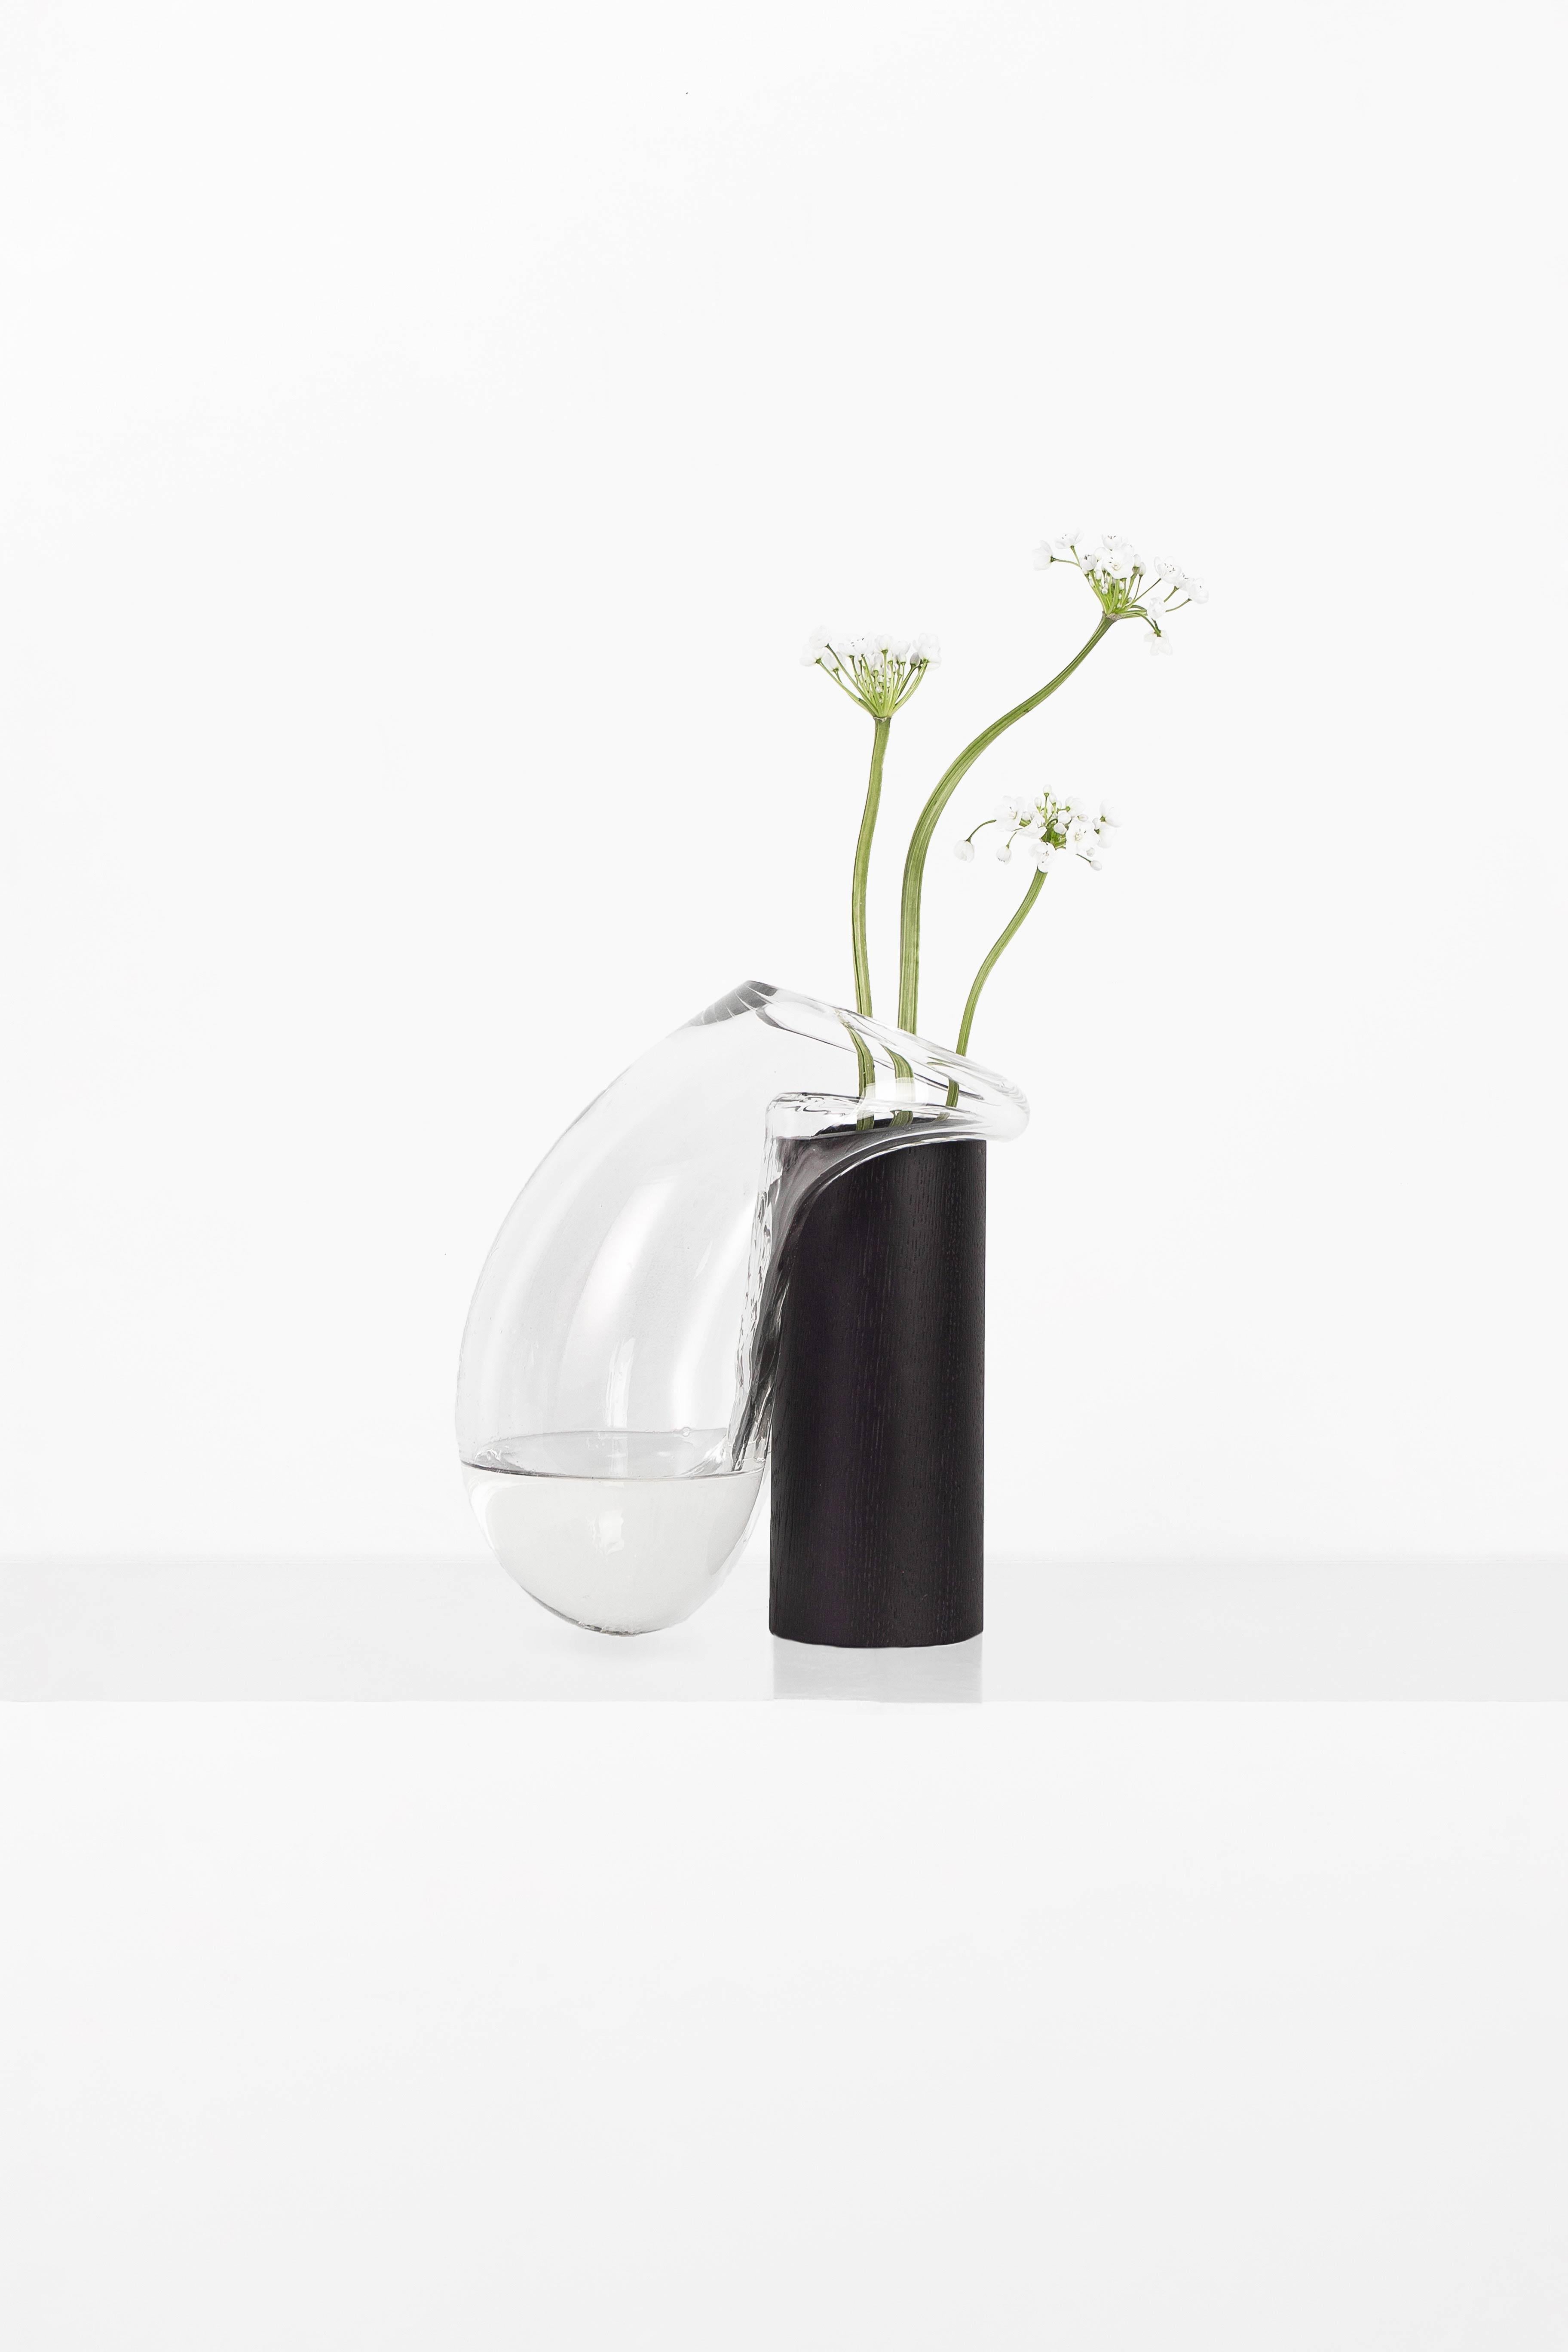 Hand-Crafted Modern Gutta Boon Vase CS1 by Noom in Blown Transparent Glass and Oak Base